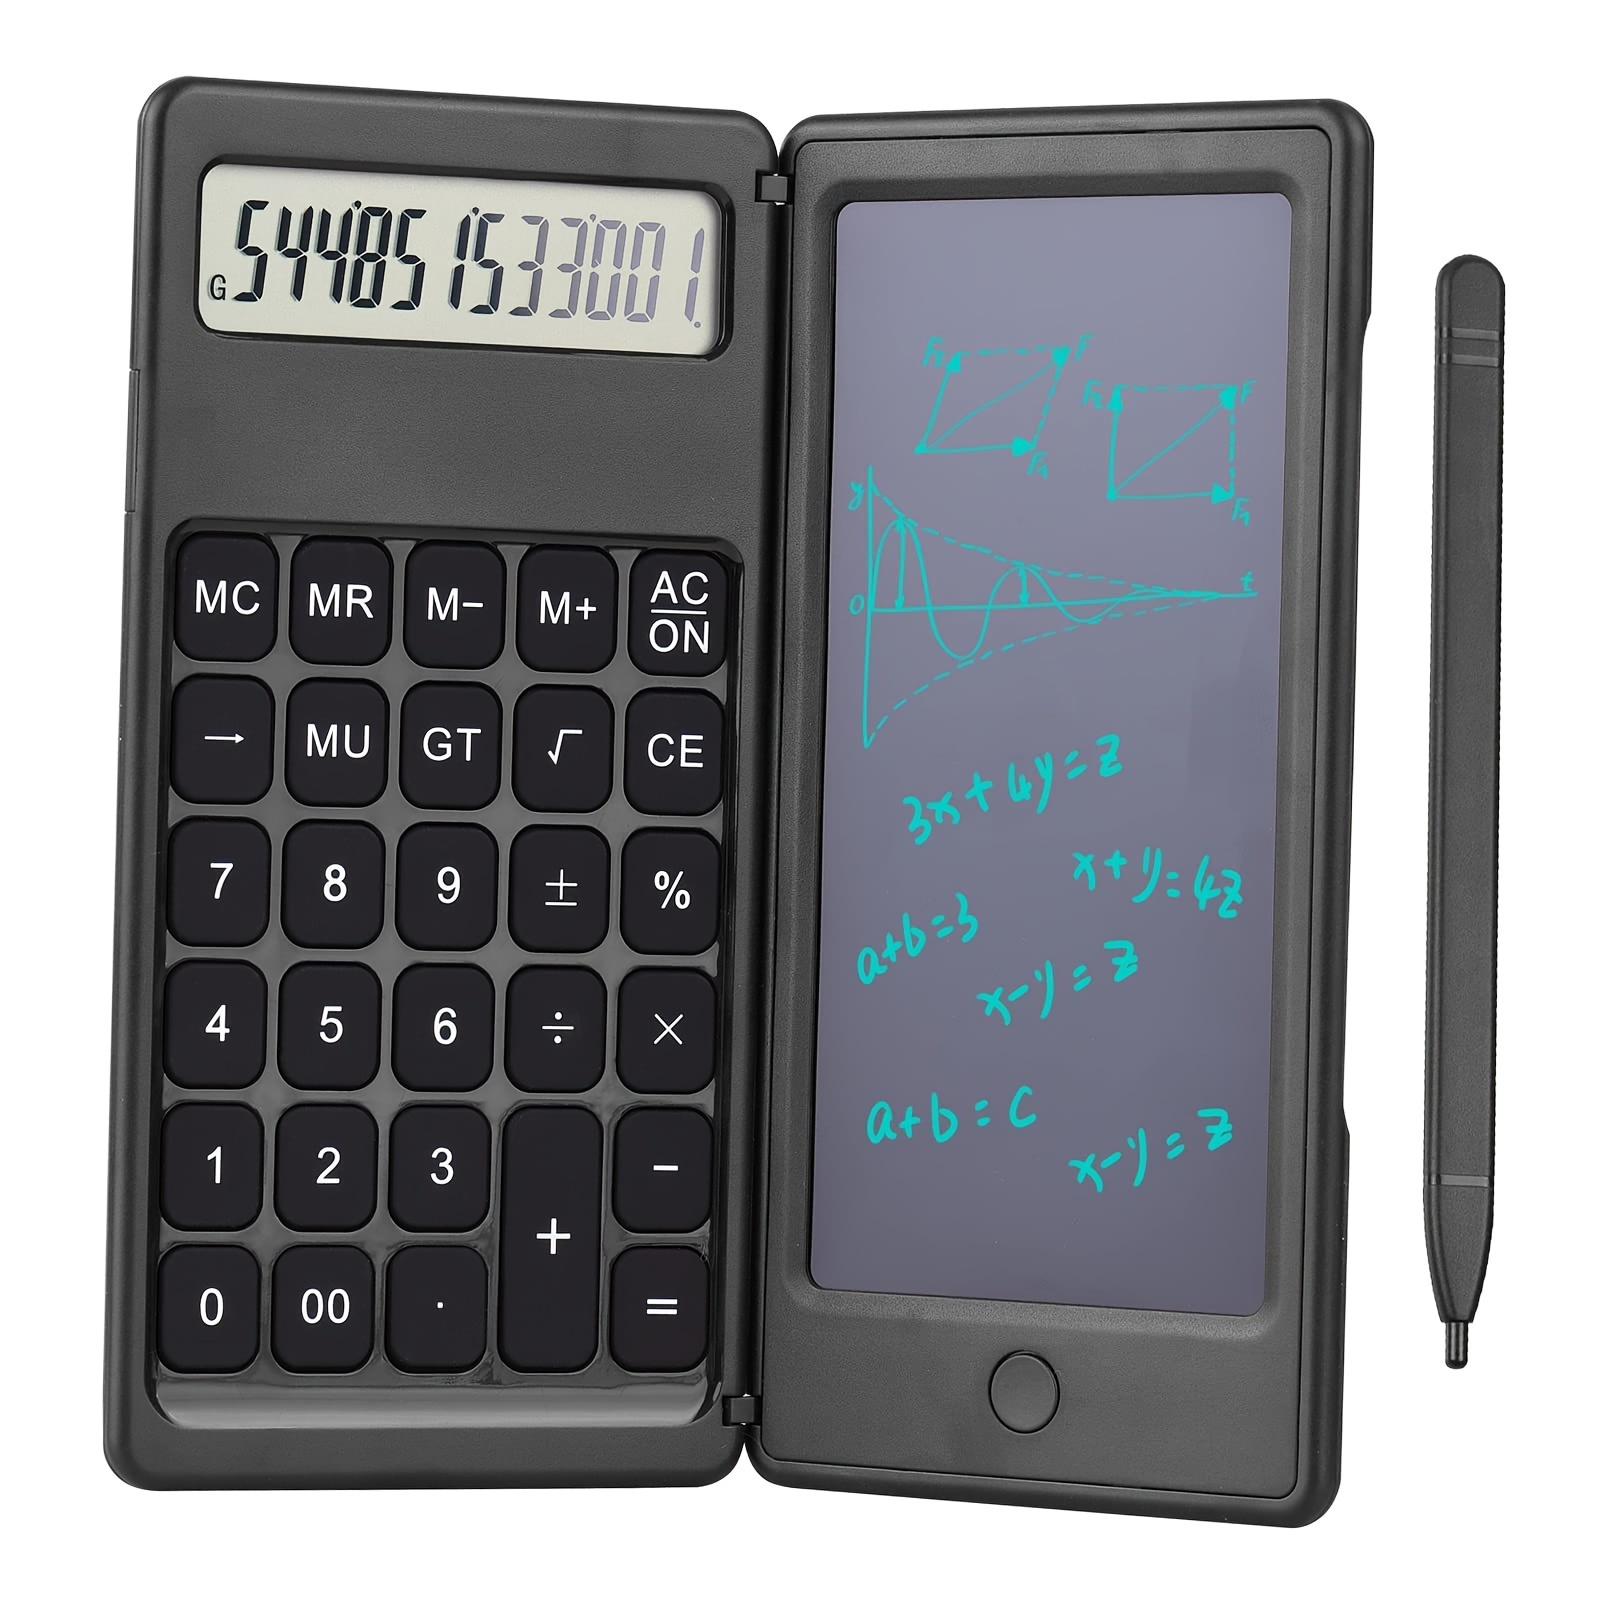 

high-performance" 12-digit With Writing Tablet - Foldable, Dual Lcd Display, Quiet Keypad, Portable For School & Office Use